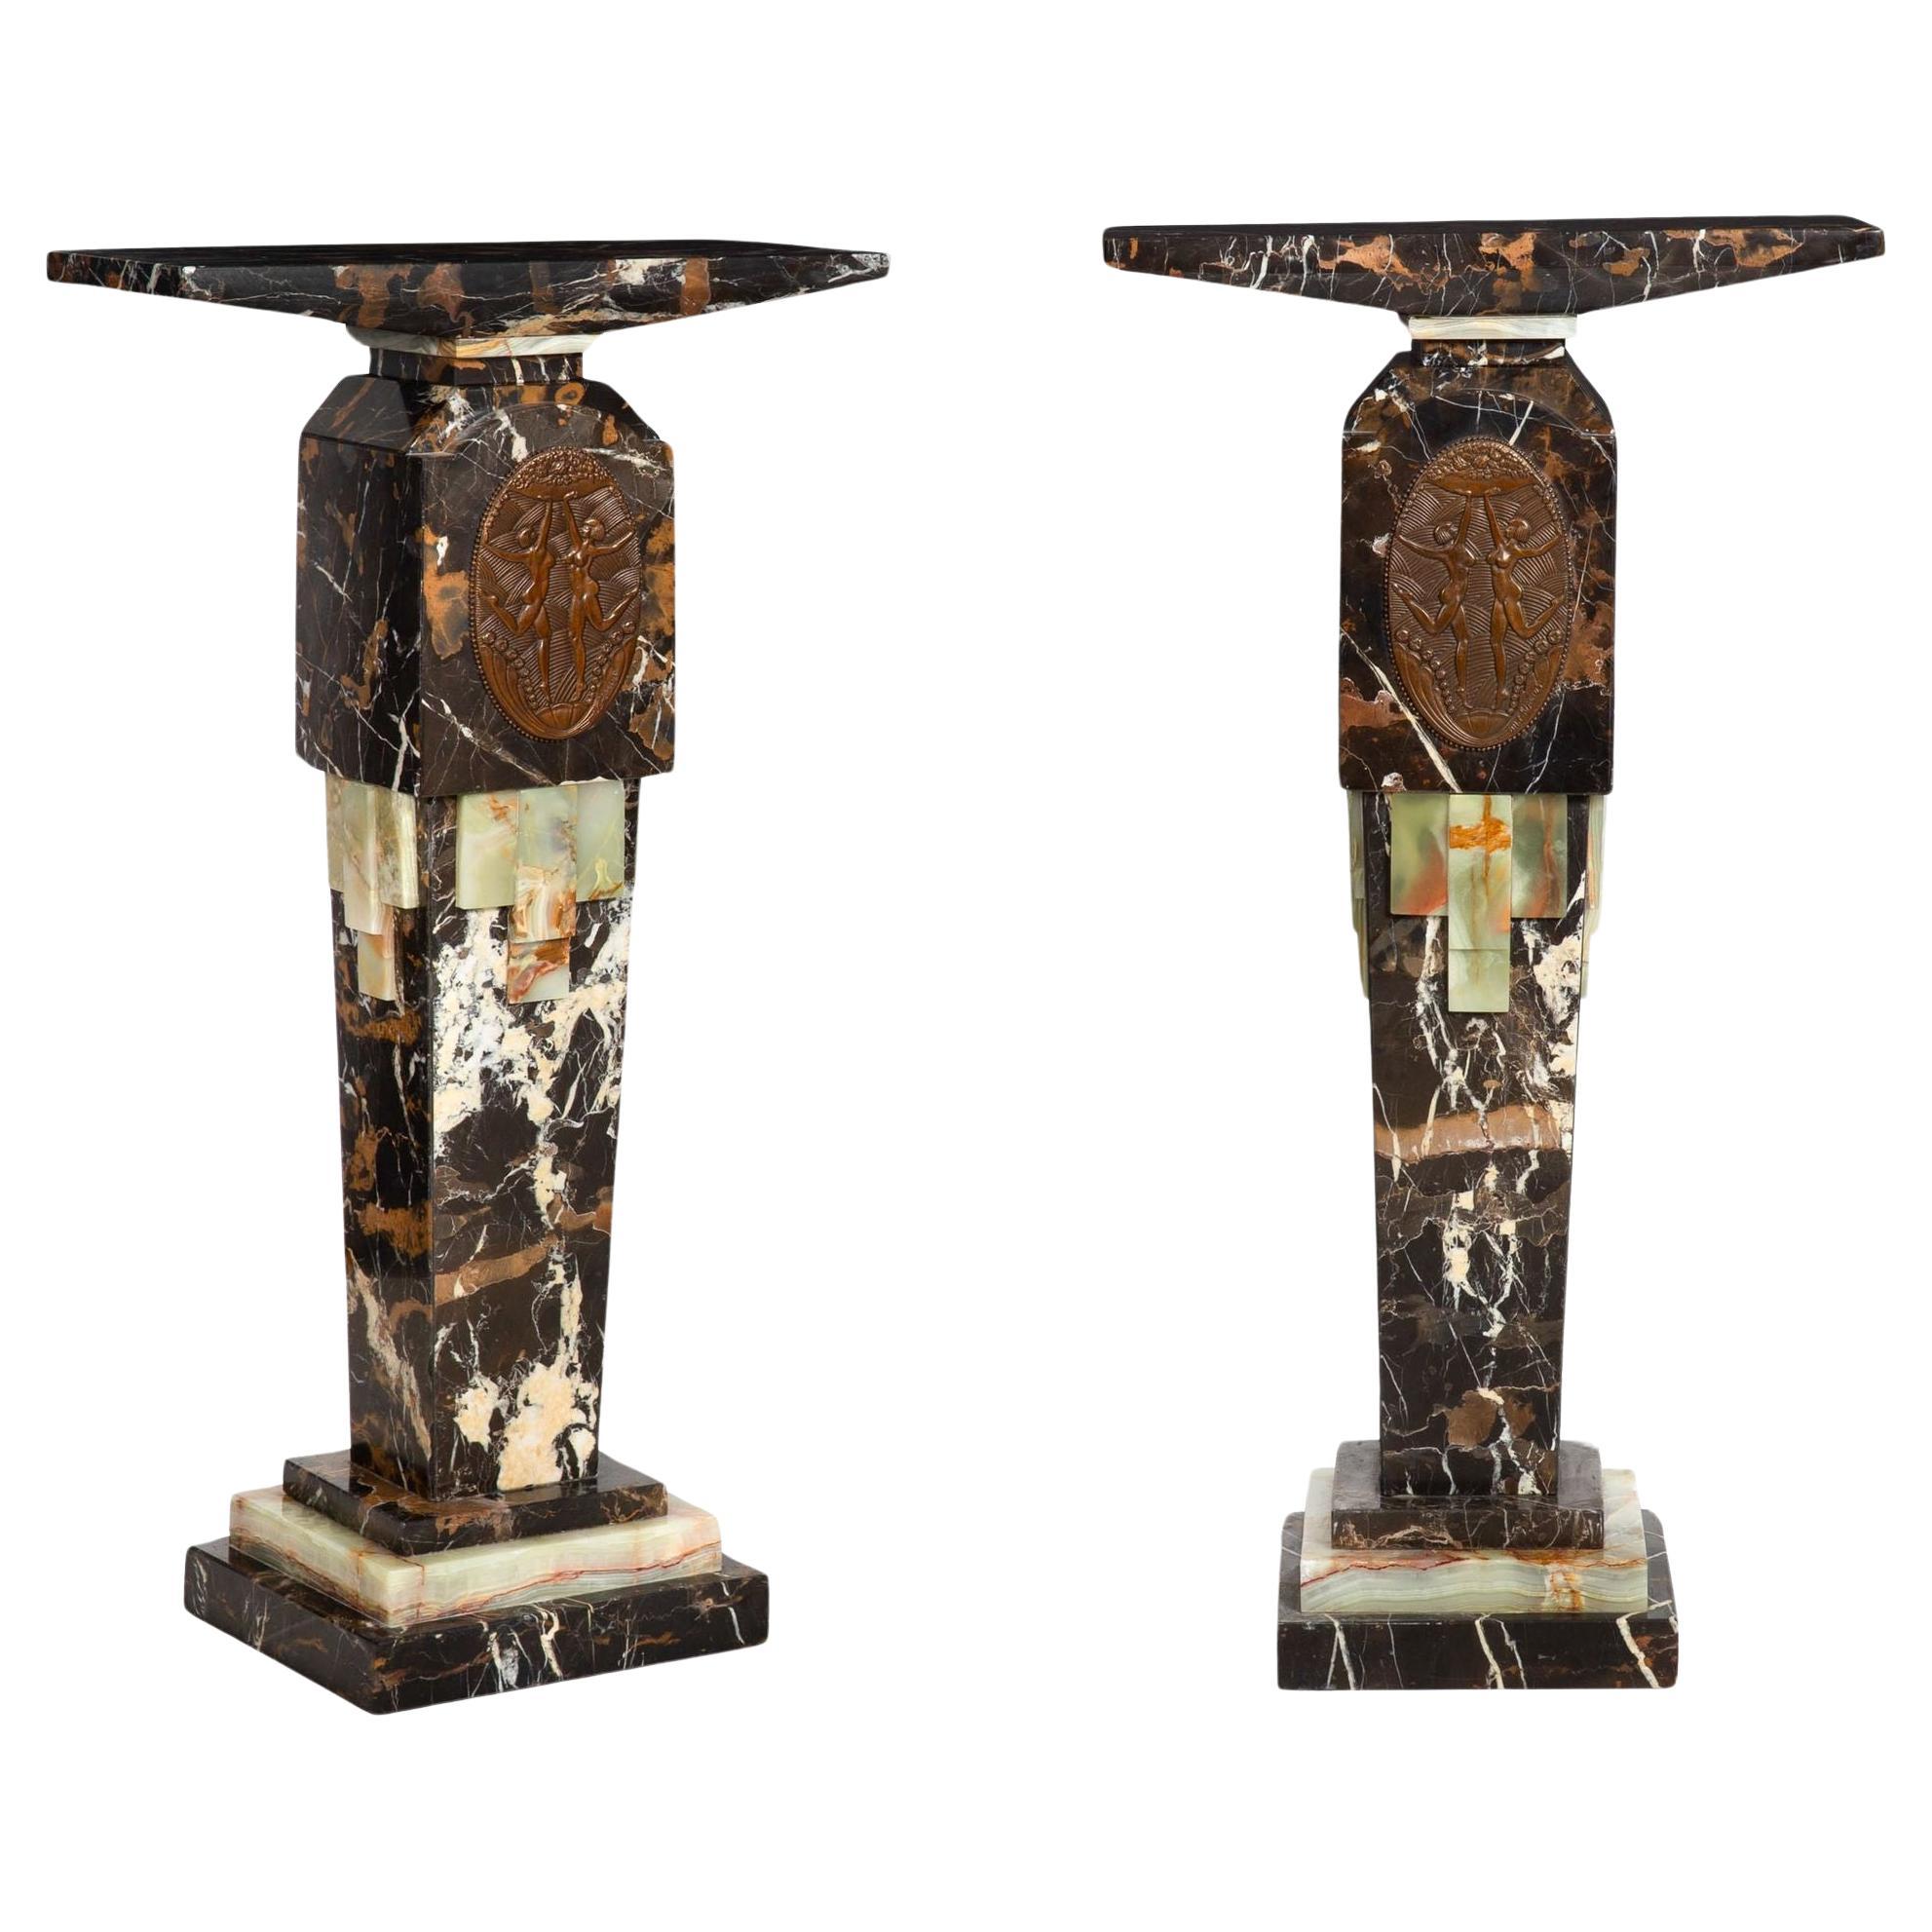 Pair of Art Deco Style Marble & Onyx Pedestals Columns with Bronze Panels For Sale